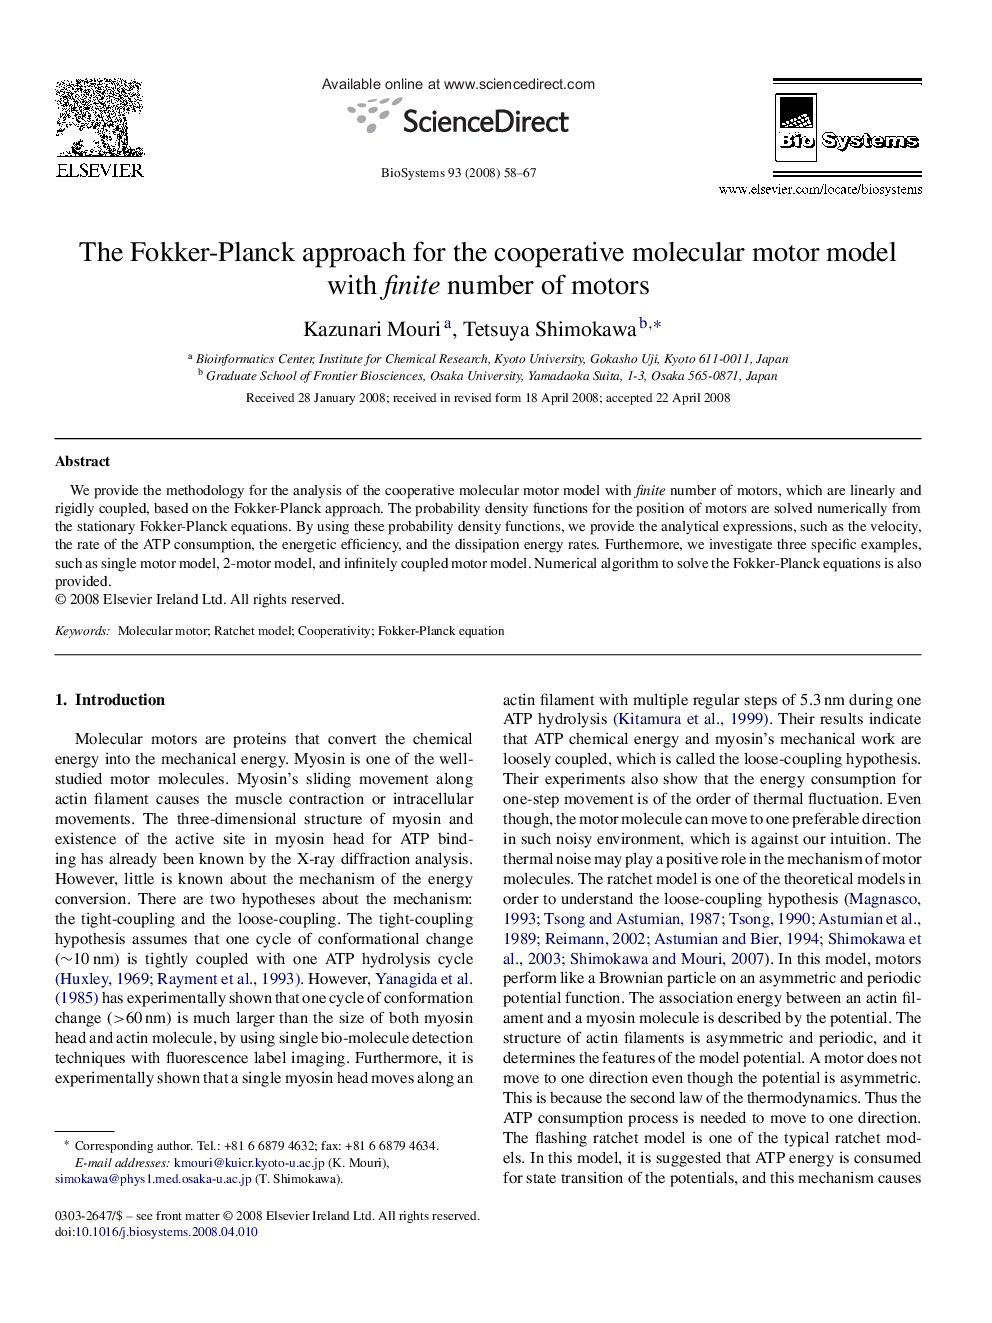 The Fokker-Planck approach for the cooperative molecular motor model with finite number of motors